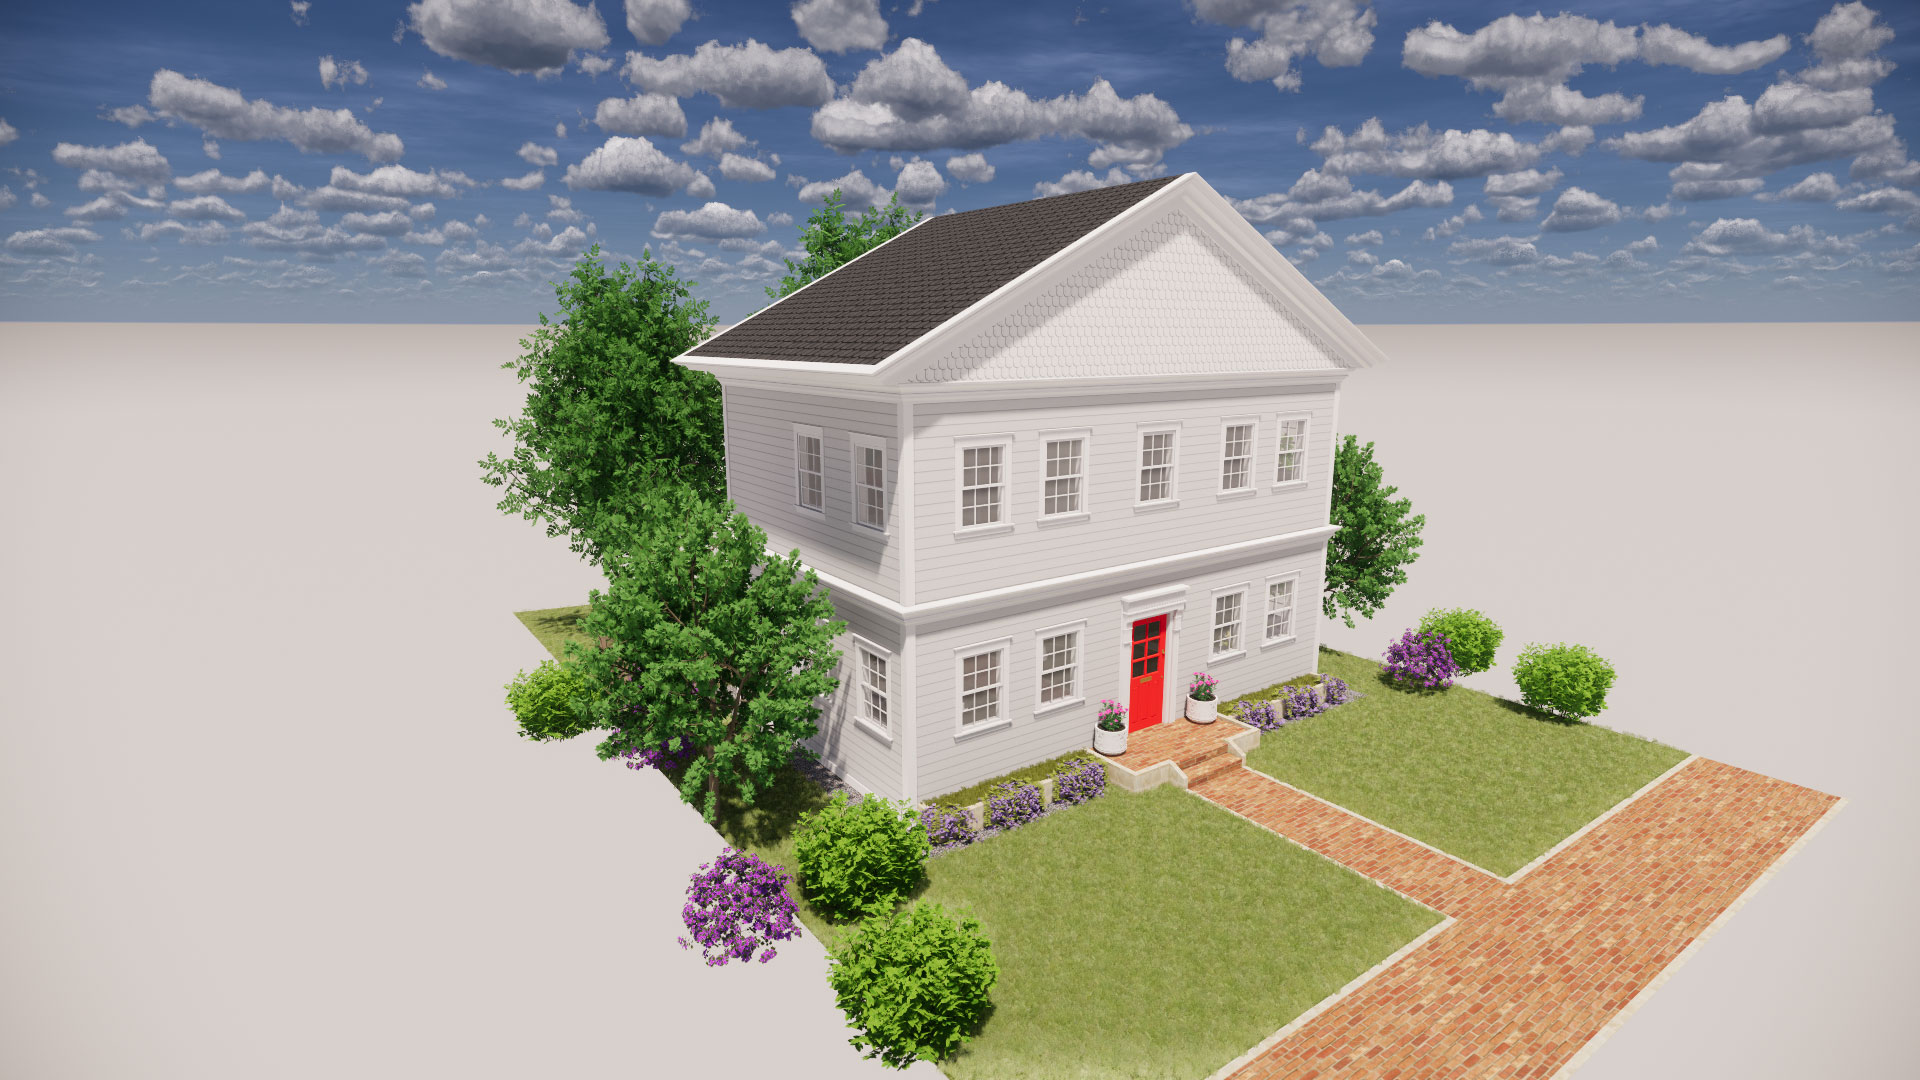 Render of two story style for colonial home, with red front door and many windows.